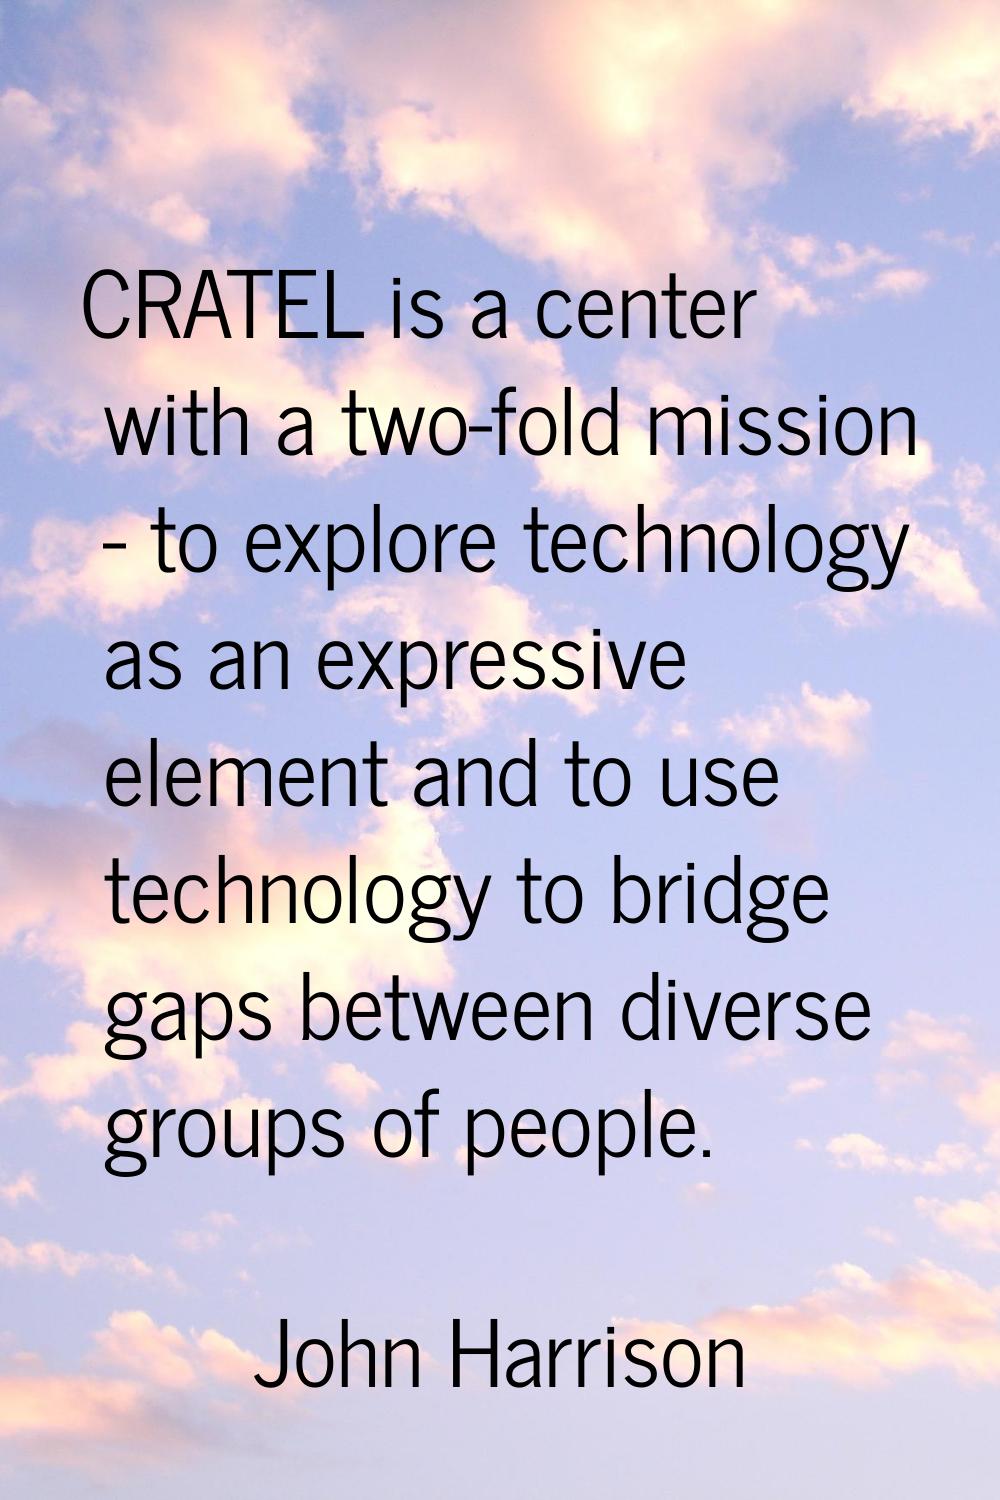 CRATEL is a center with a two-fold mission - to explore technology as an expressive element and to 